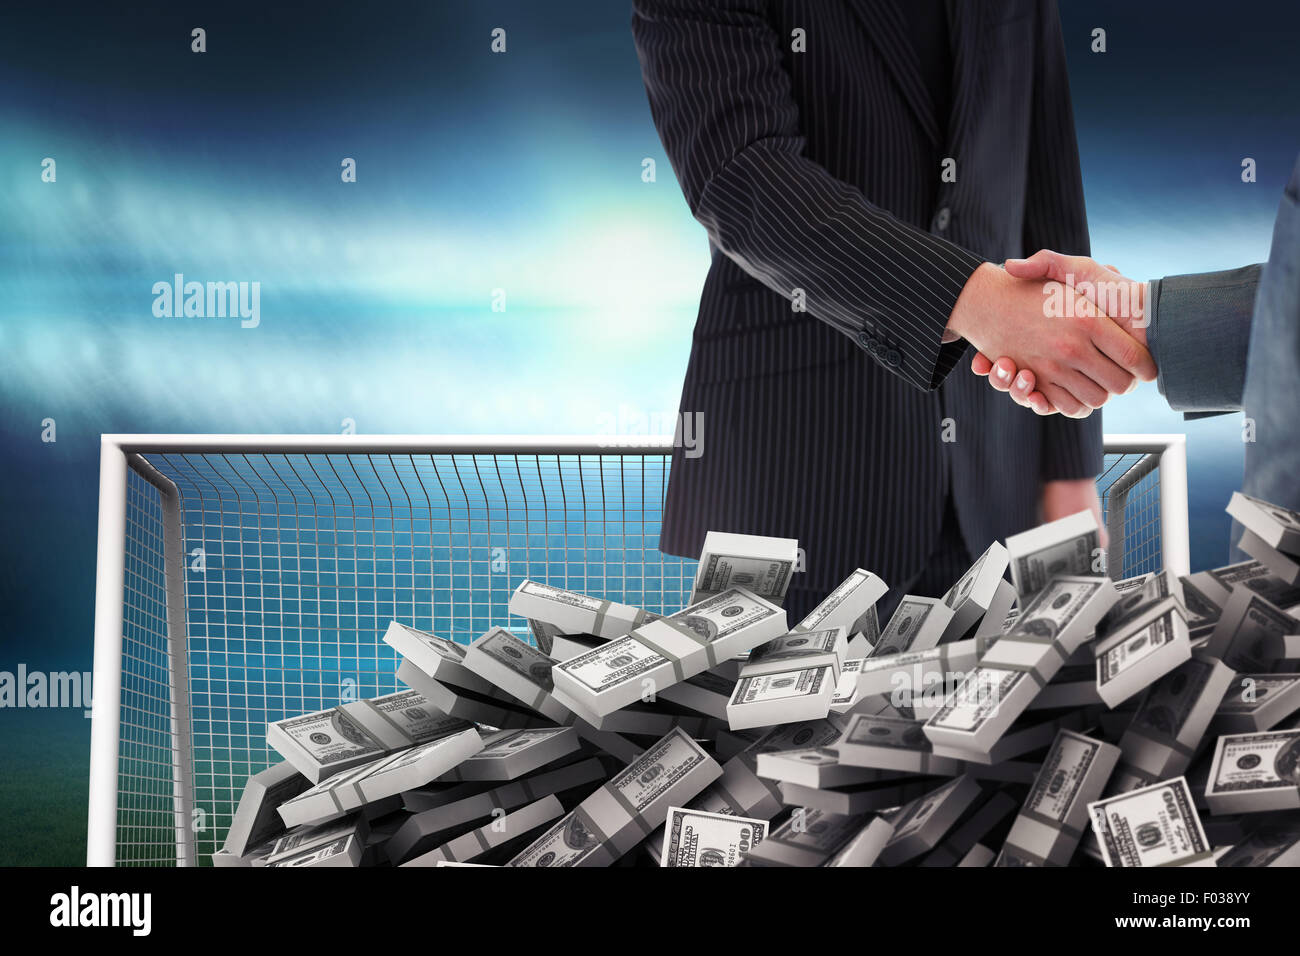 Composite image of business people shaking hands Stock Photo